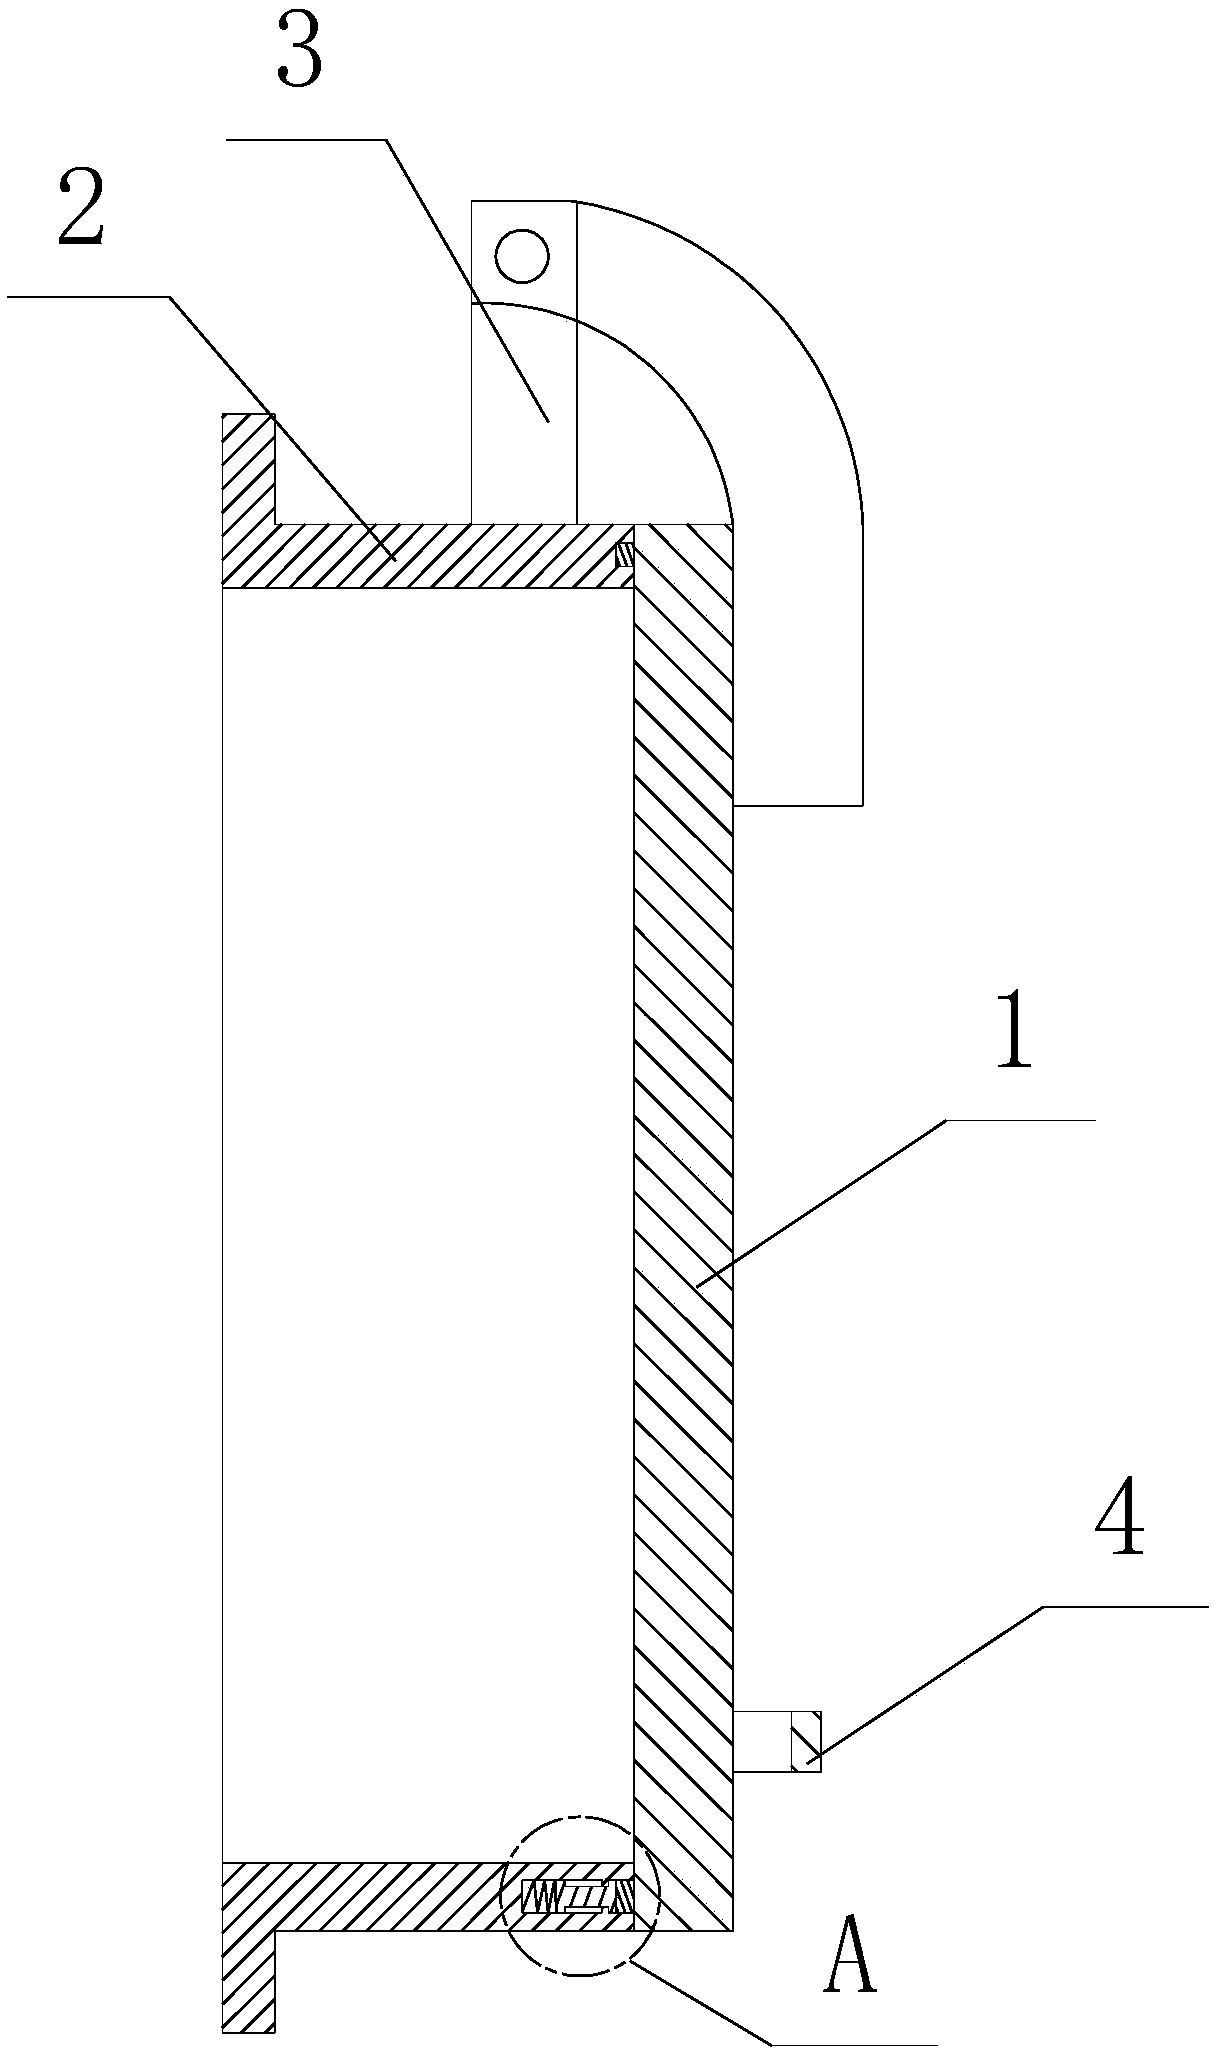 Flap valve with buffer structures